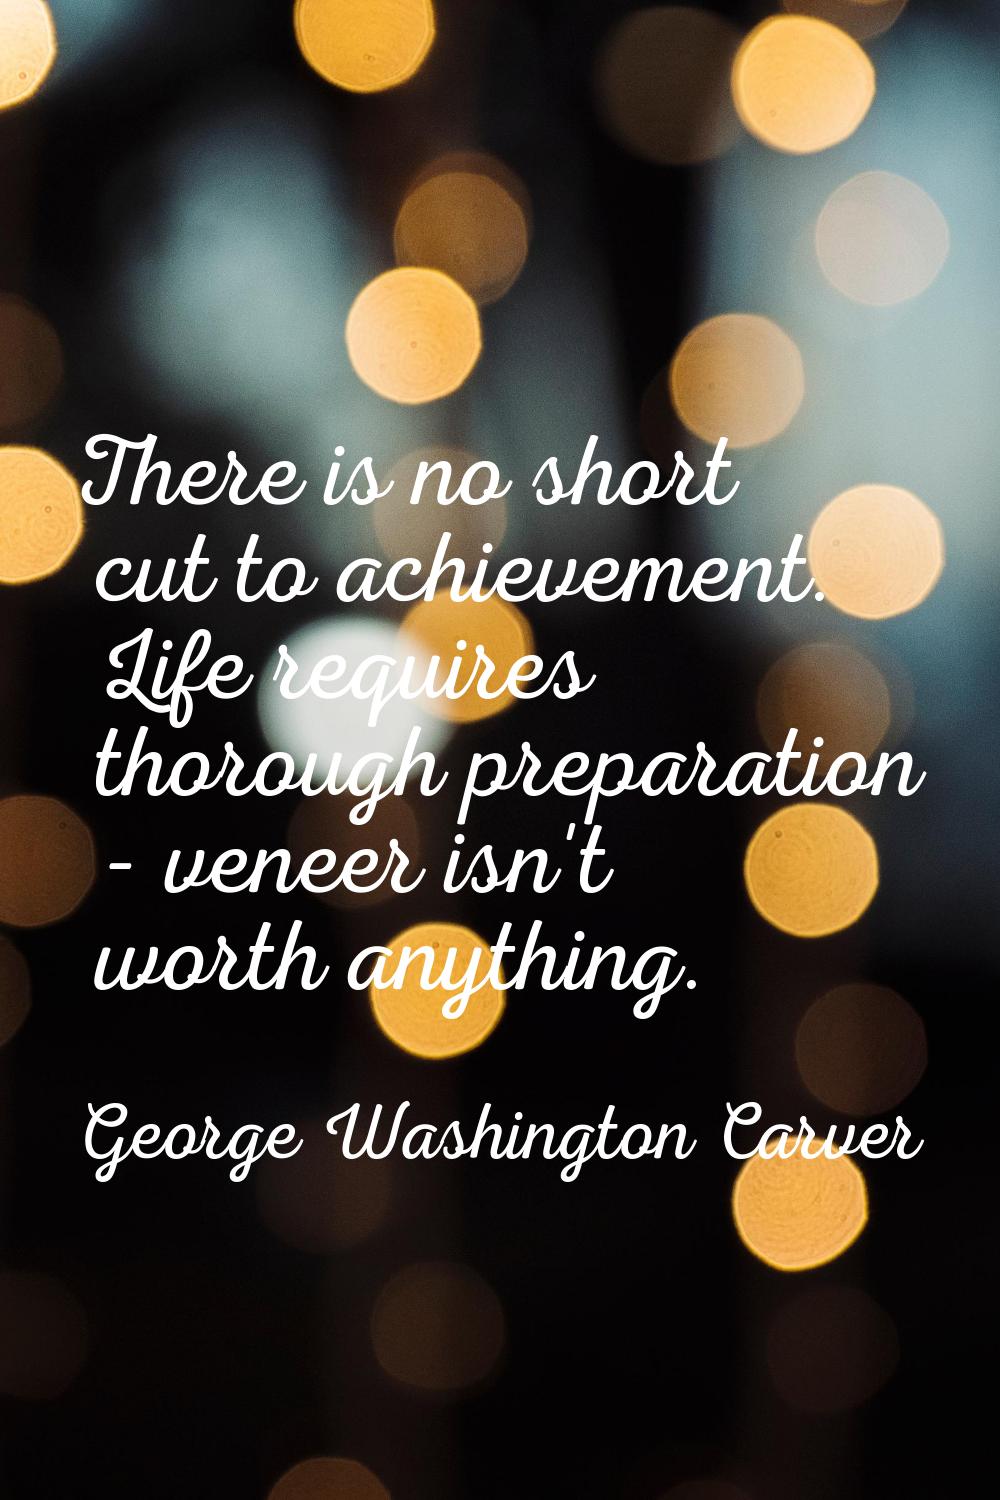 There is no short cut to achievement. Life requires thorough preparation - veneer isn't worth anyth